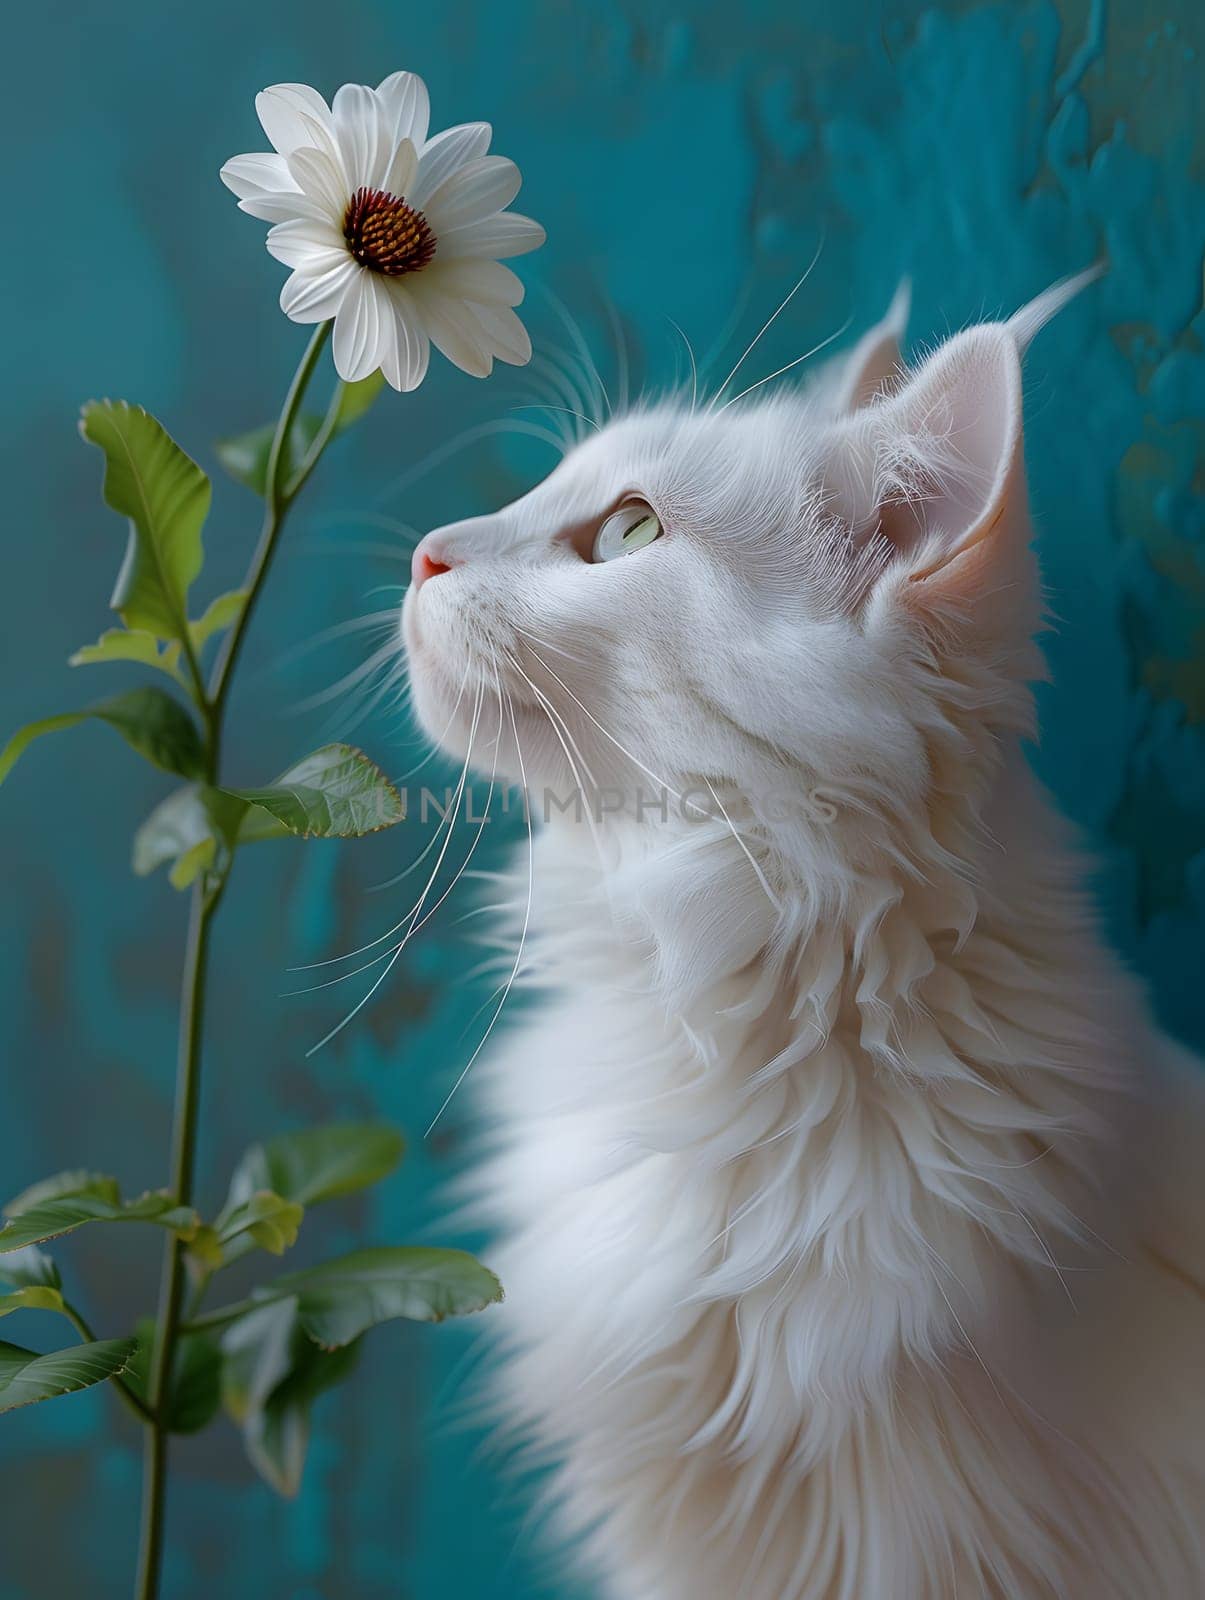 A small to mediumsized Felidae carnivore, the fluffy white cat, is smelling a flower with its whiskers twitching on a blue background. The cats snout is touching the delicate petal of the plant